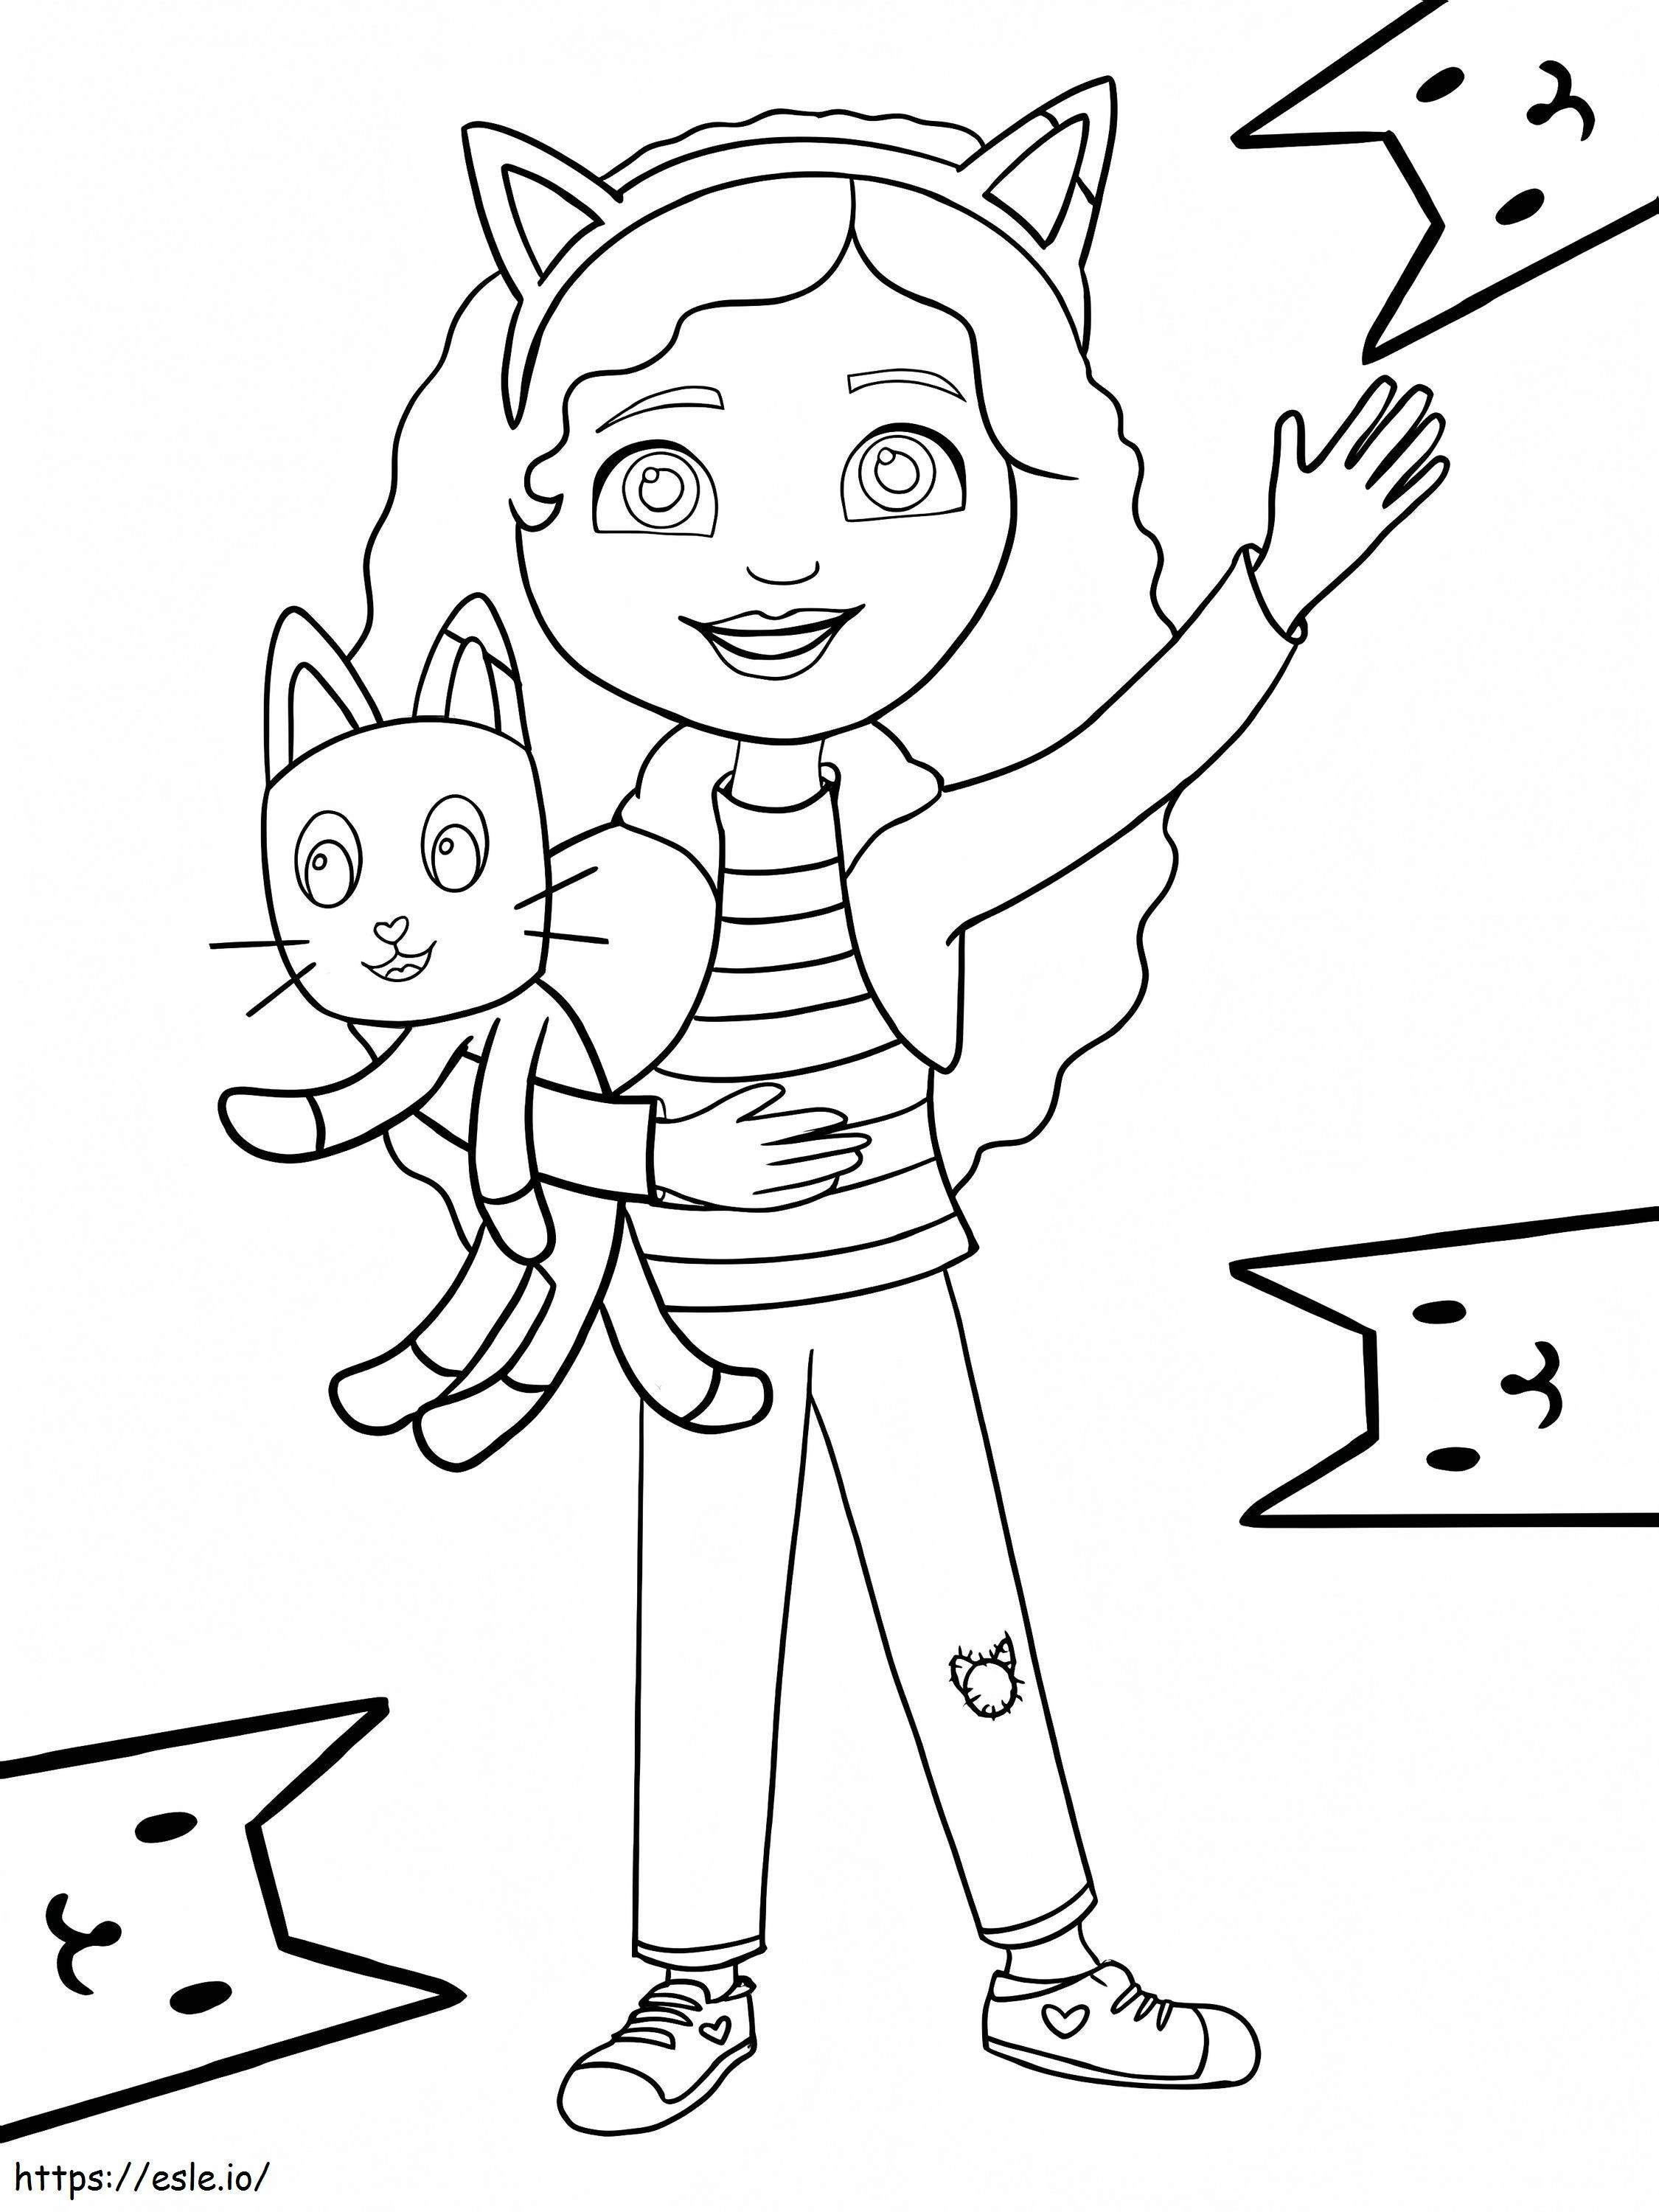 Gabby From Gabbys Dollhouse coloring page